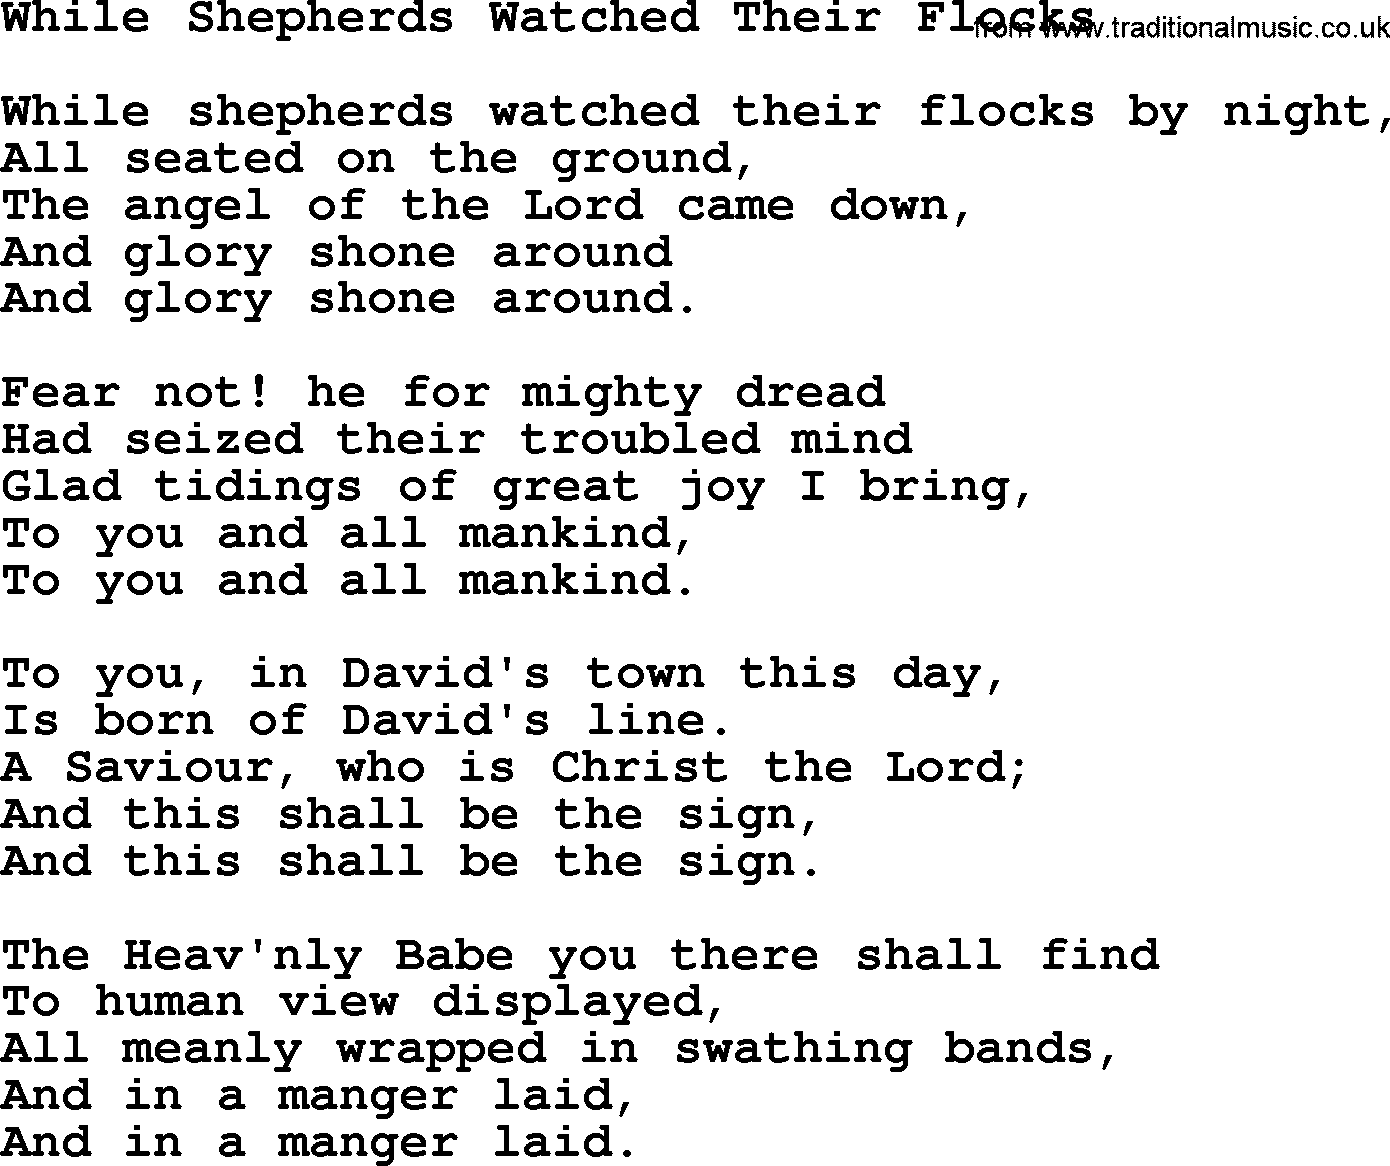 while shepherds watched their flocks by night song